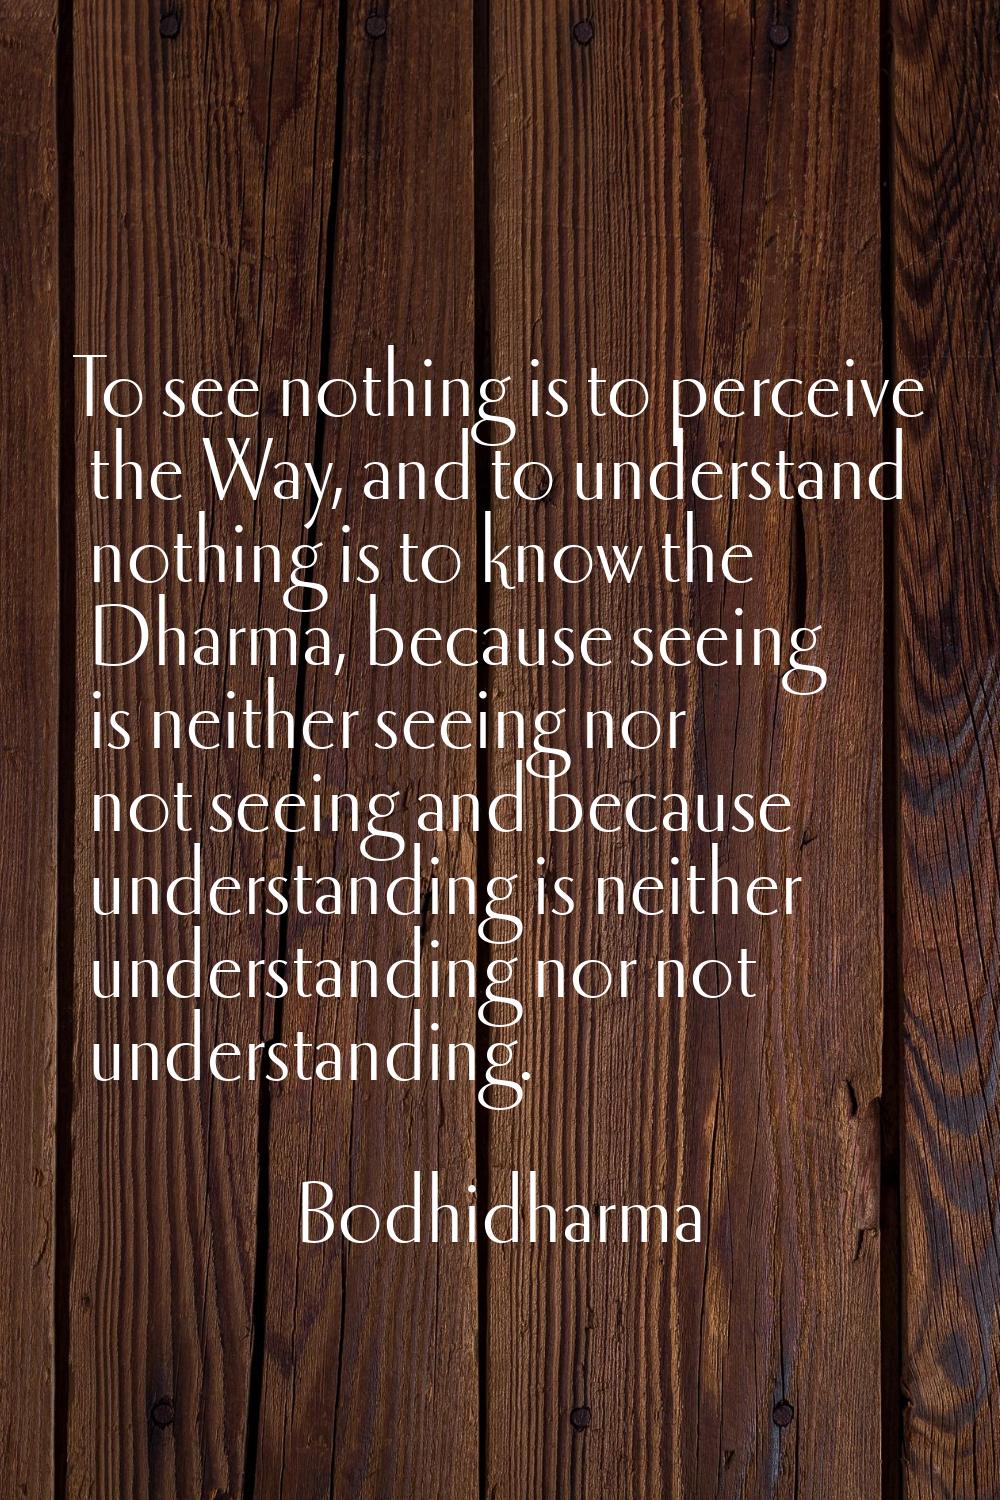 To see nothing is to perceive the Way, and to understand nothing is to know the Dharma, because see